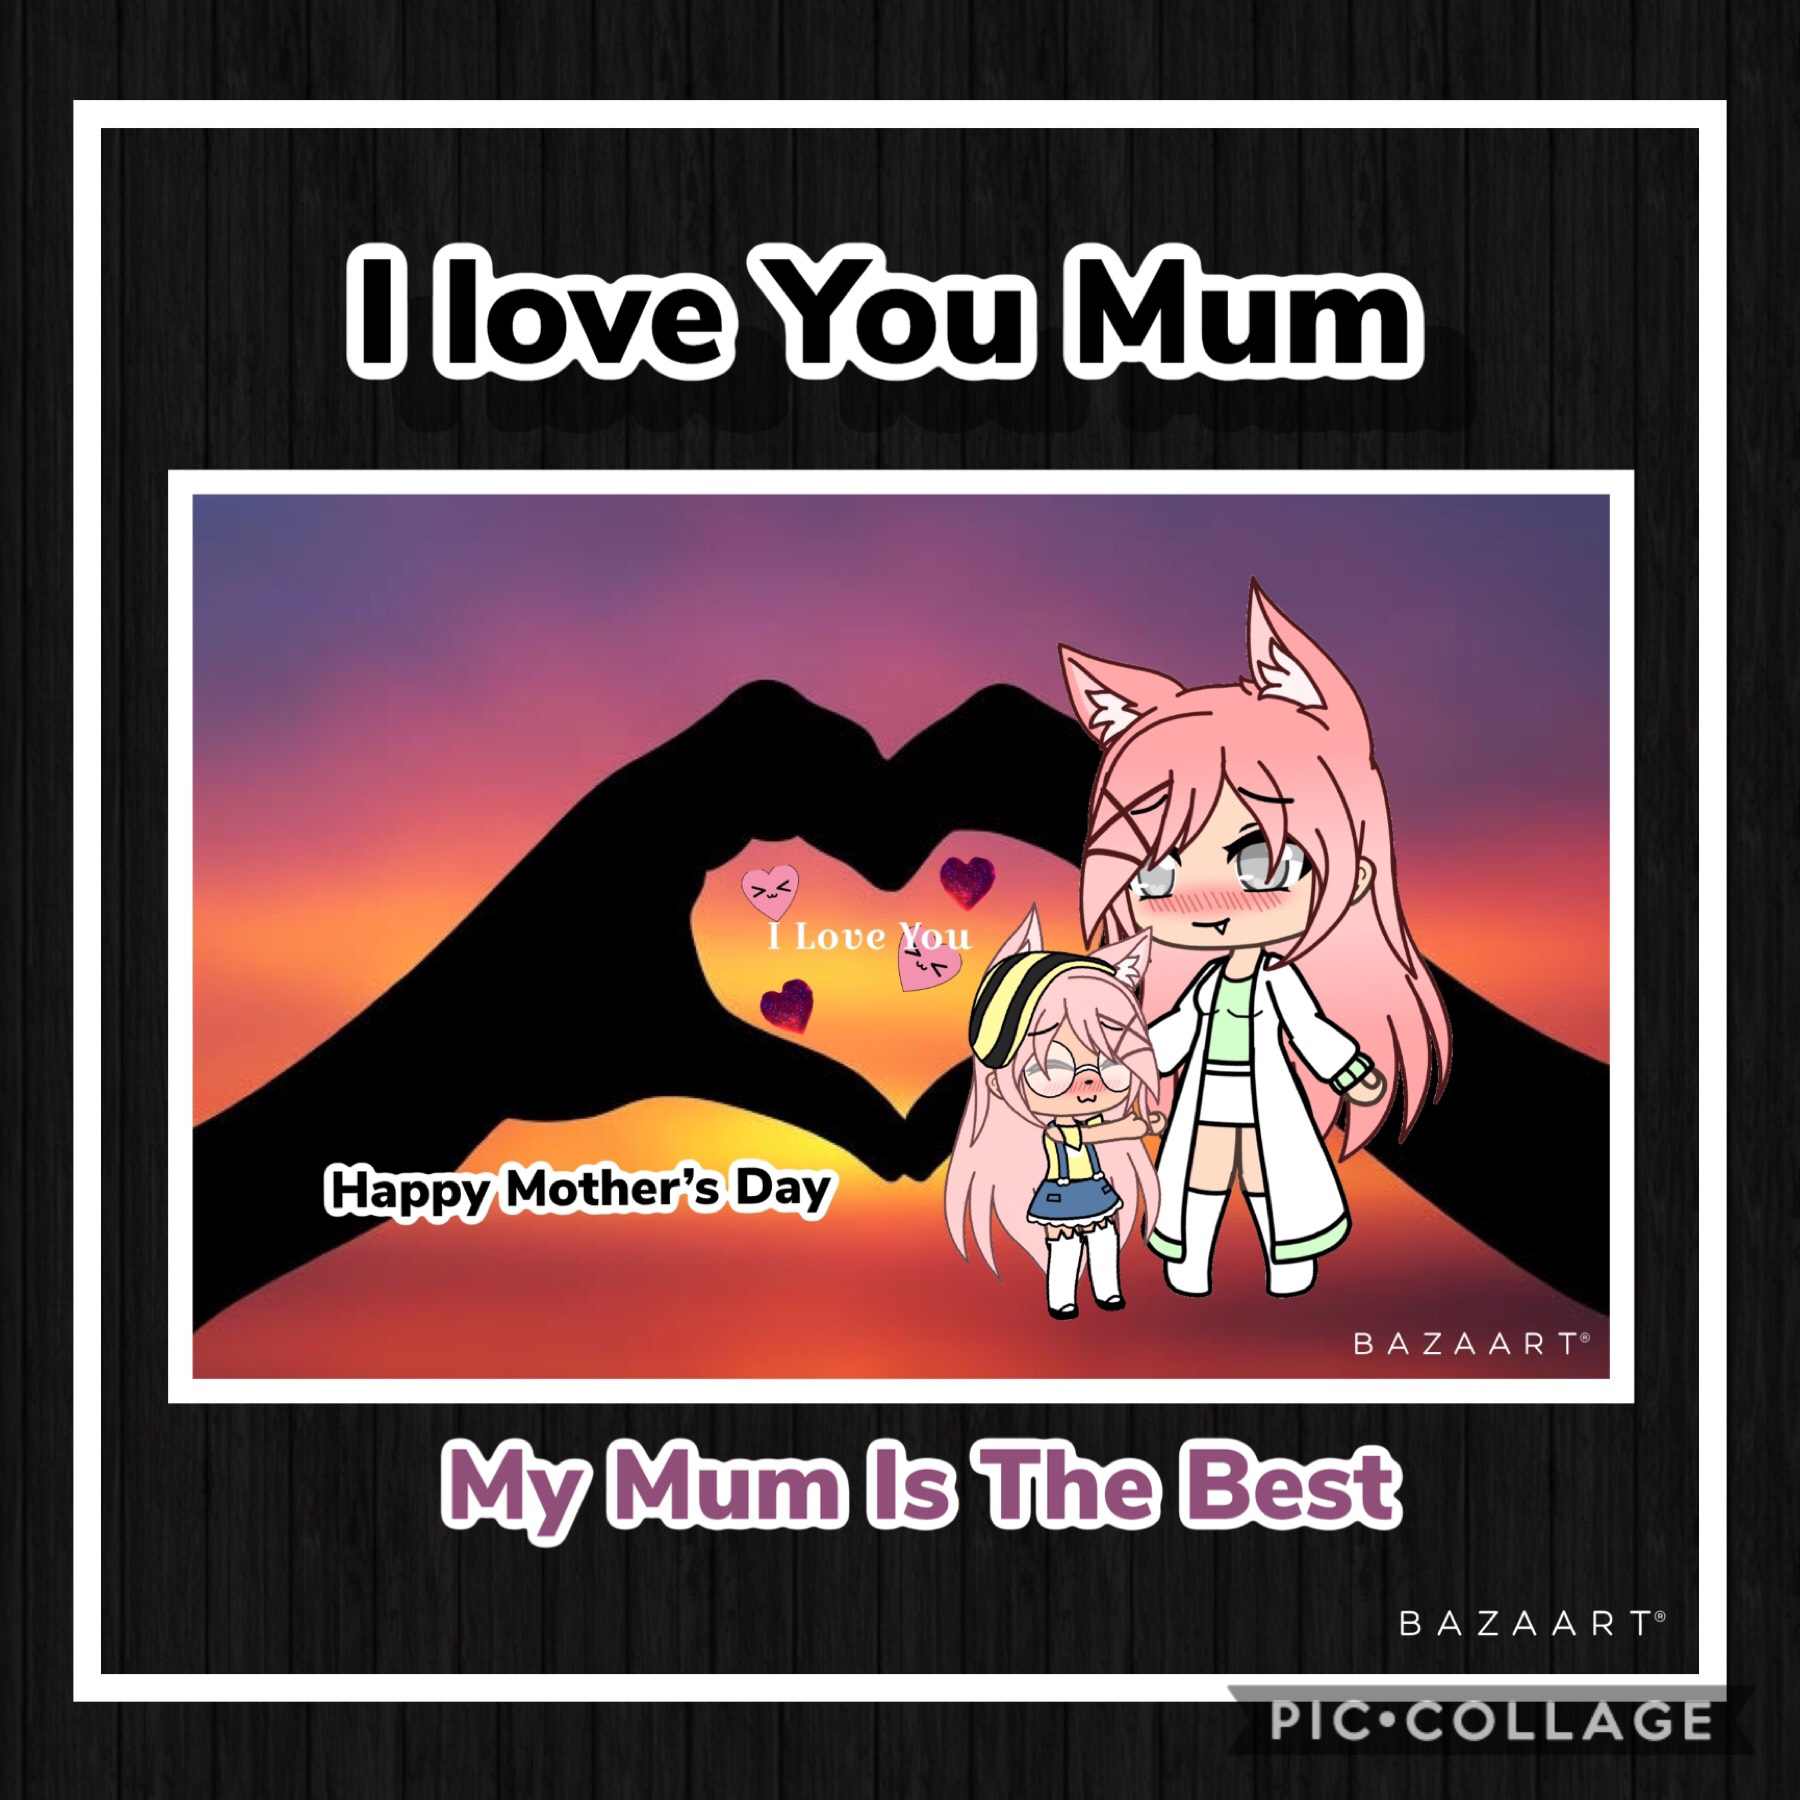 Happy Mother’s Day To All Mums And That All Mums Are Special I Know That They Are Loved🥰🥰